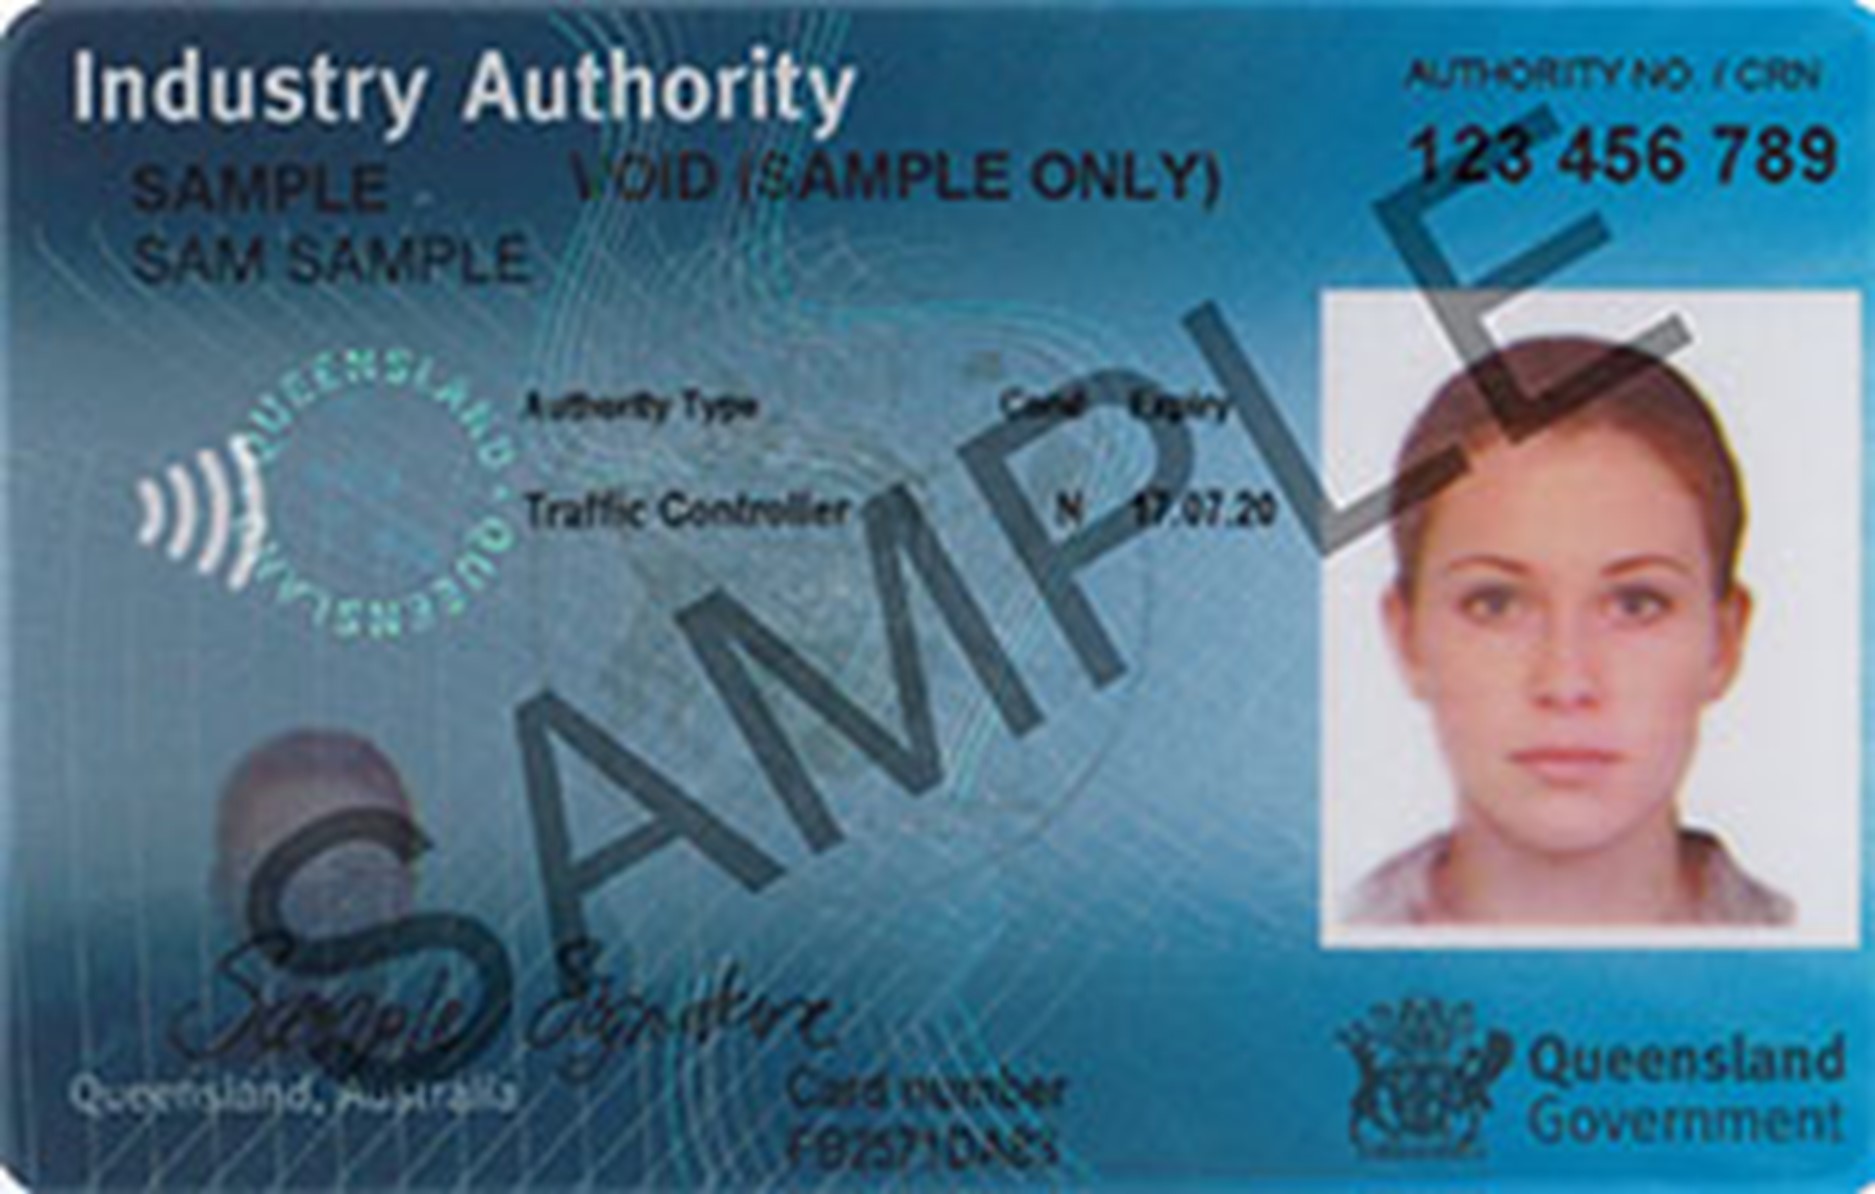 Industry Authority card, issued by TMR to driver trainers.